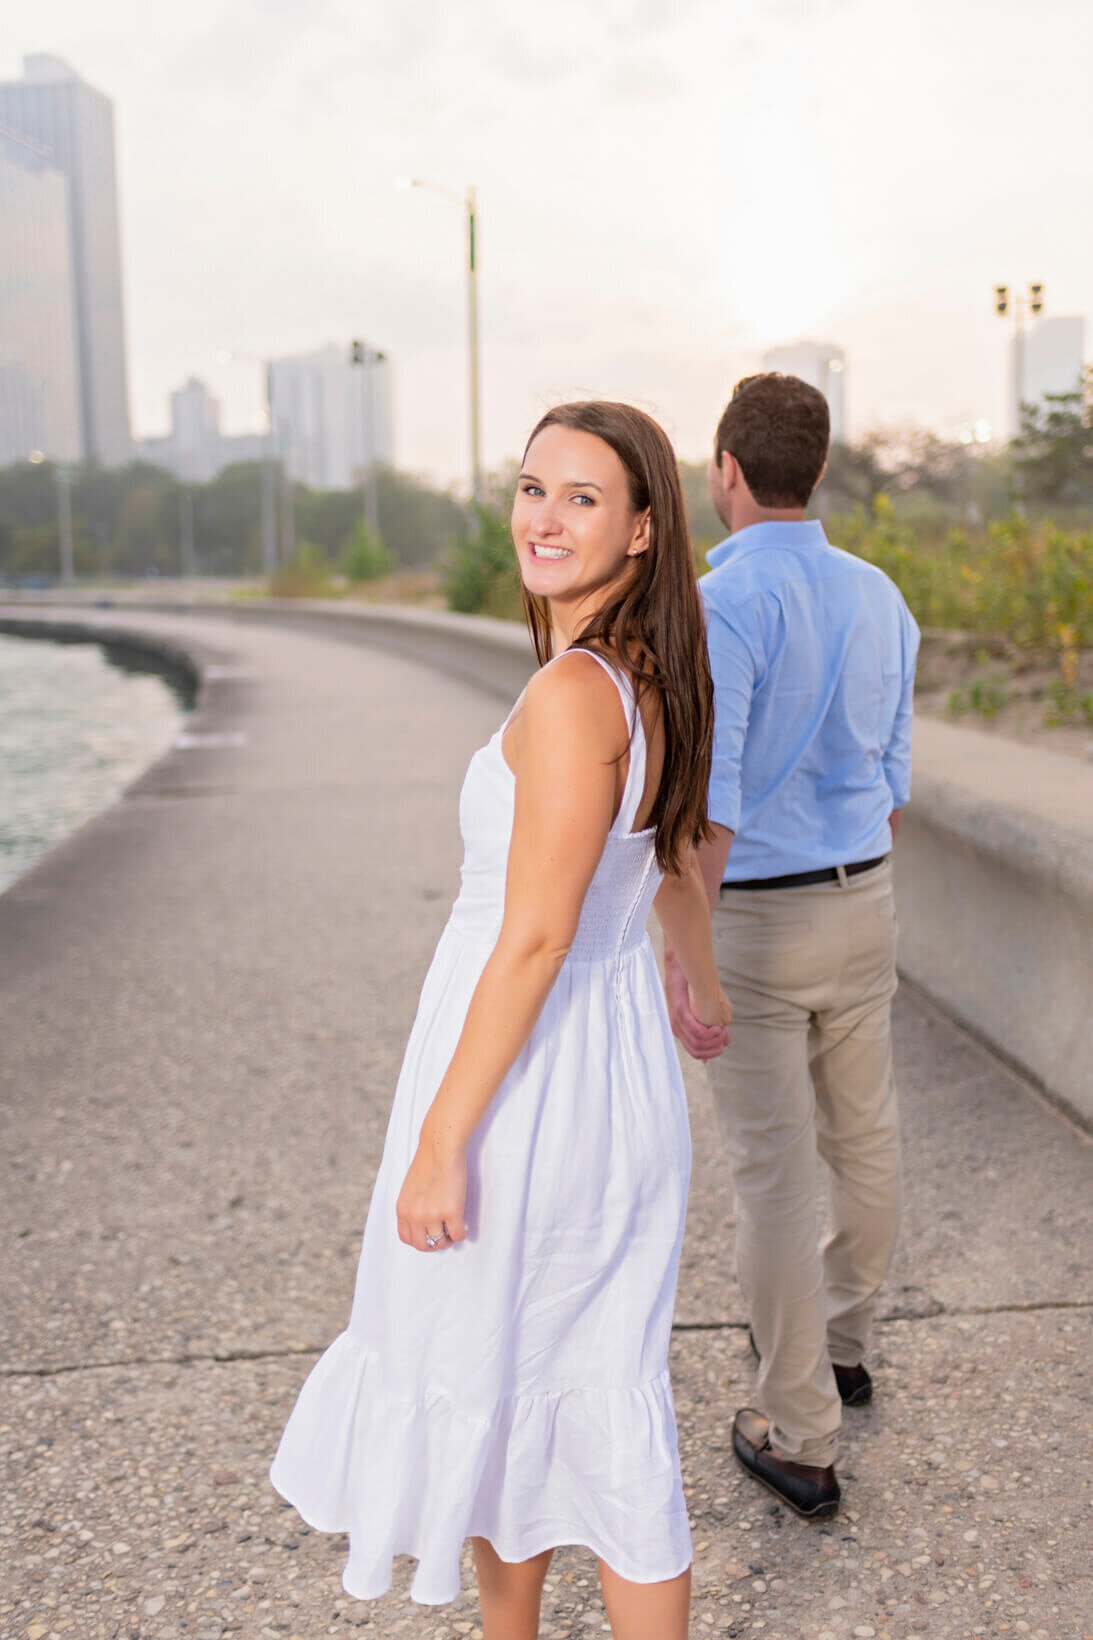 Downtown-Chicago-Engagement-Photos-91